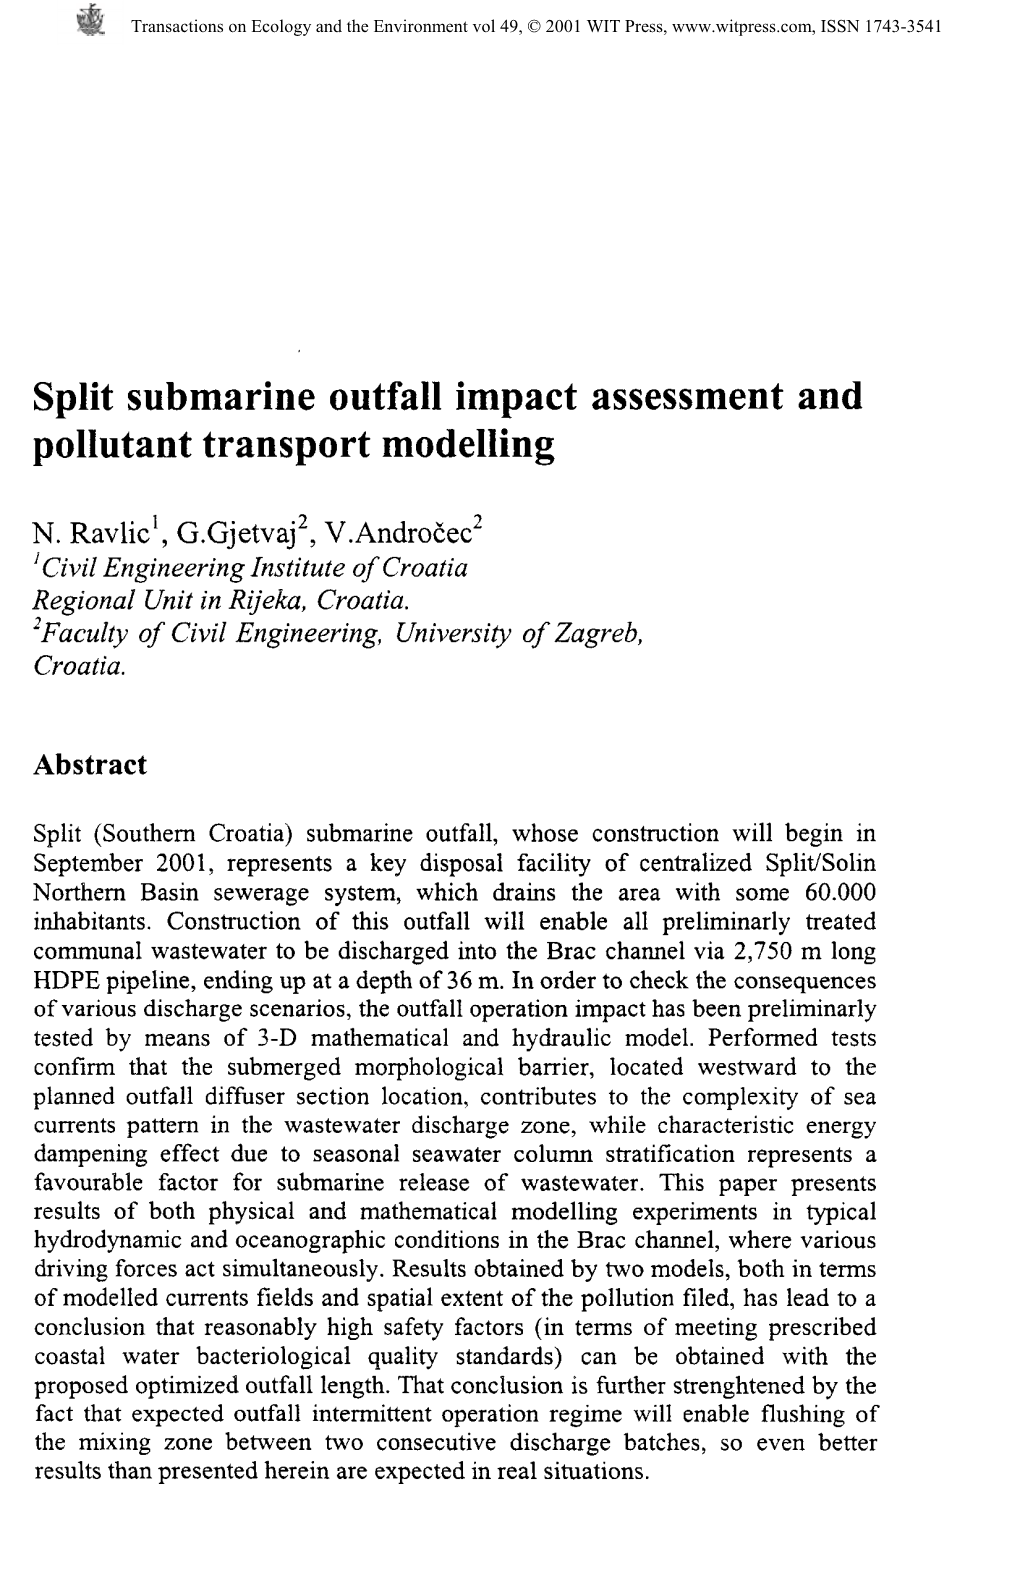 Split Submarine Outfall Impact Assessment and Pollutant Transport Modelling